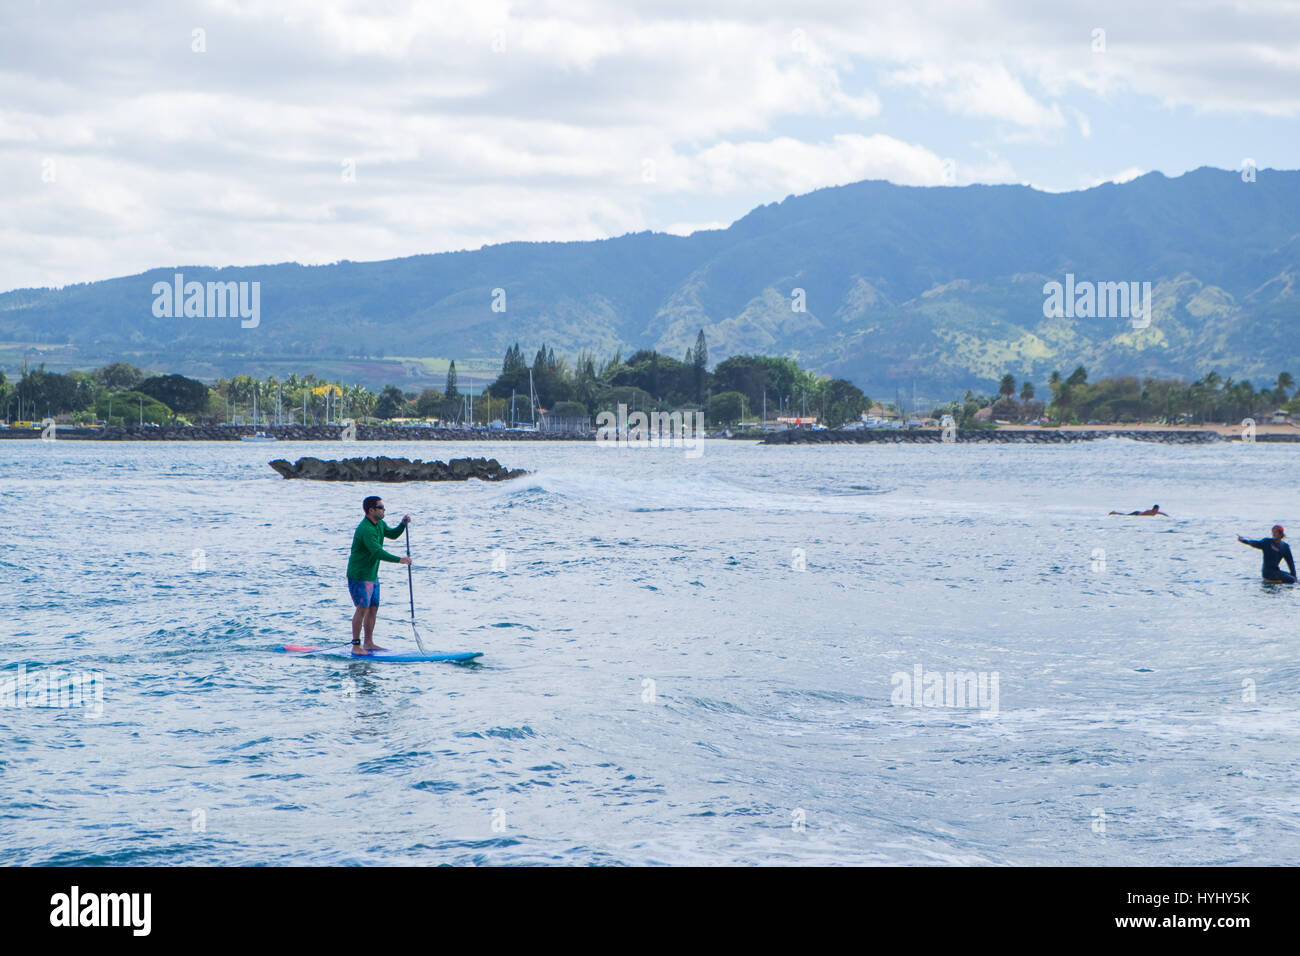 HALE'IWA, OAHU, HAWAII - FEBRUARY 23, 2017: Very busy day with many surfers and surf schools in the water catching waves in Haleiwa Oahu Hawaii. Stock Photo